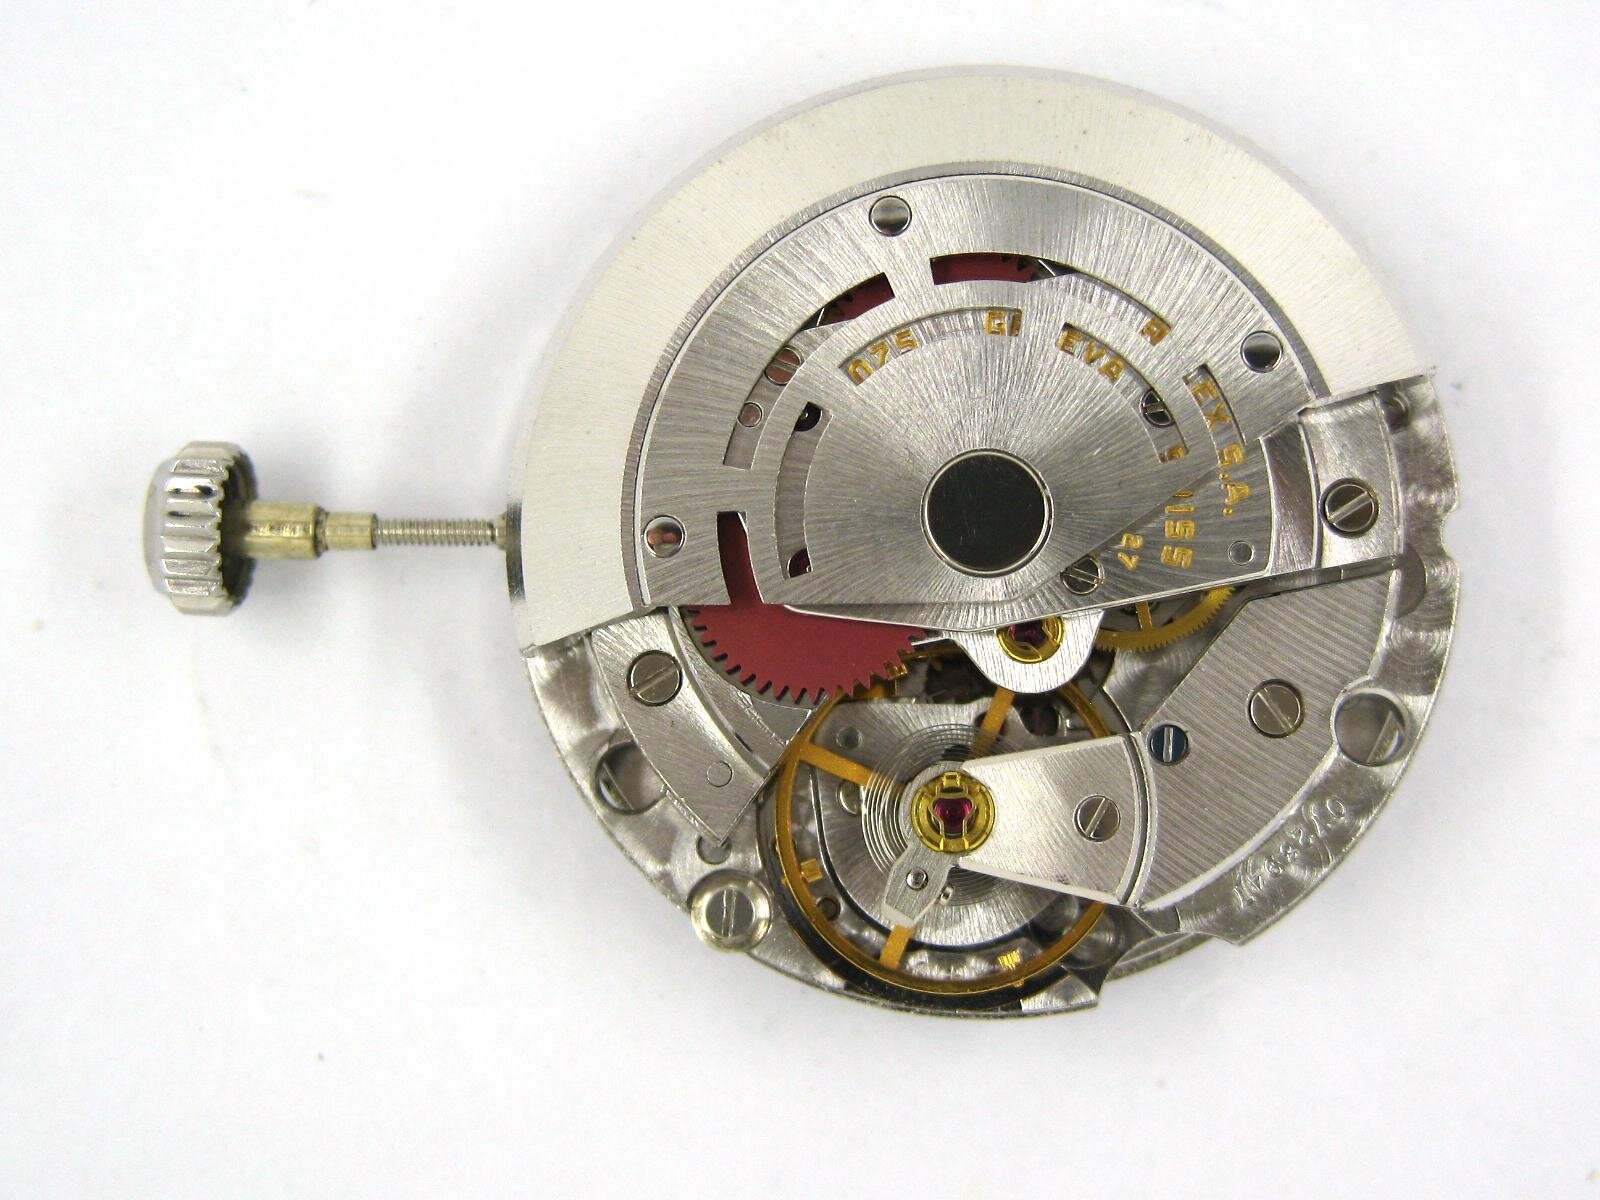 Rolex 16750 movement with dial and hand 